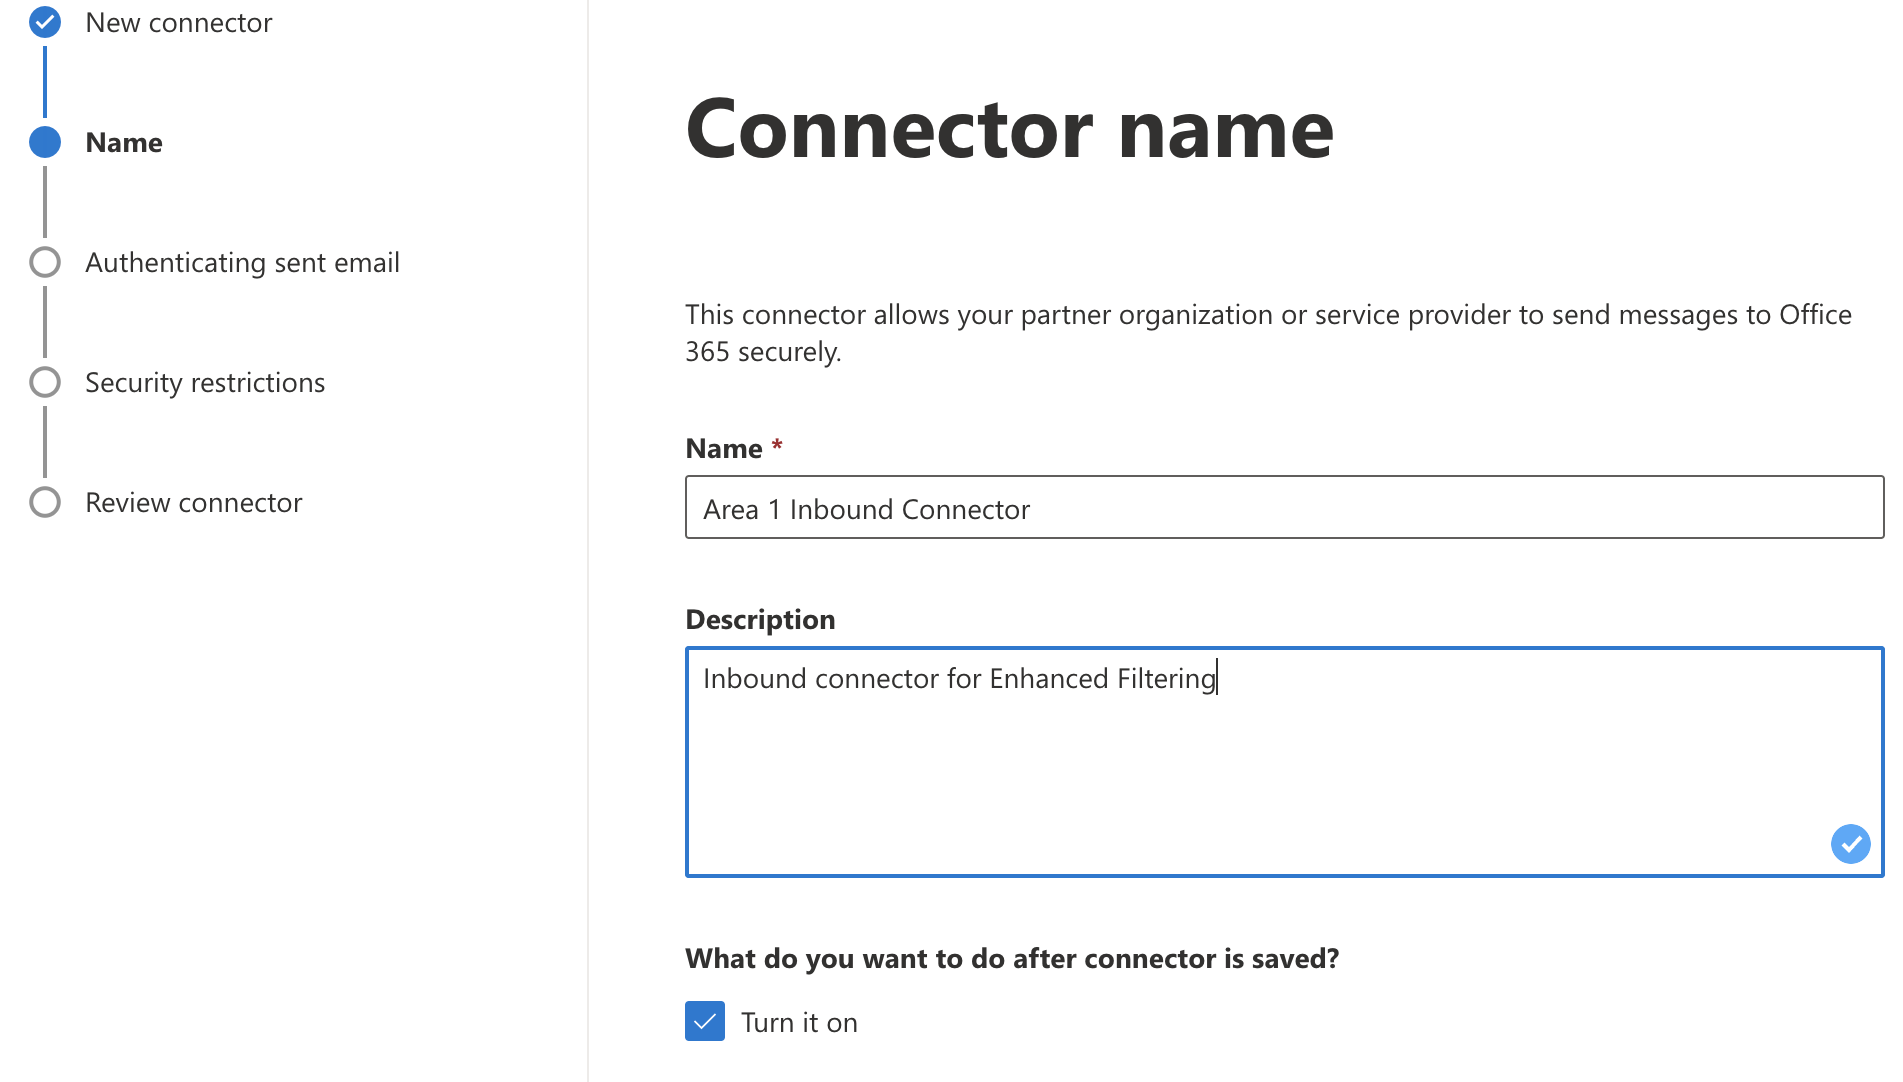 Enter a name and descriptions for your connector